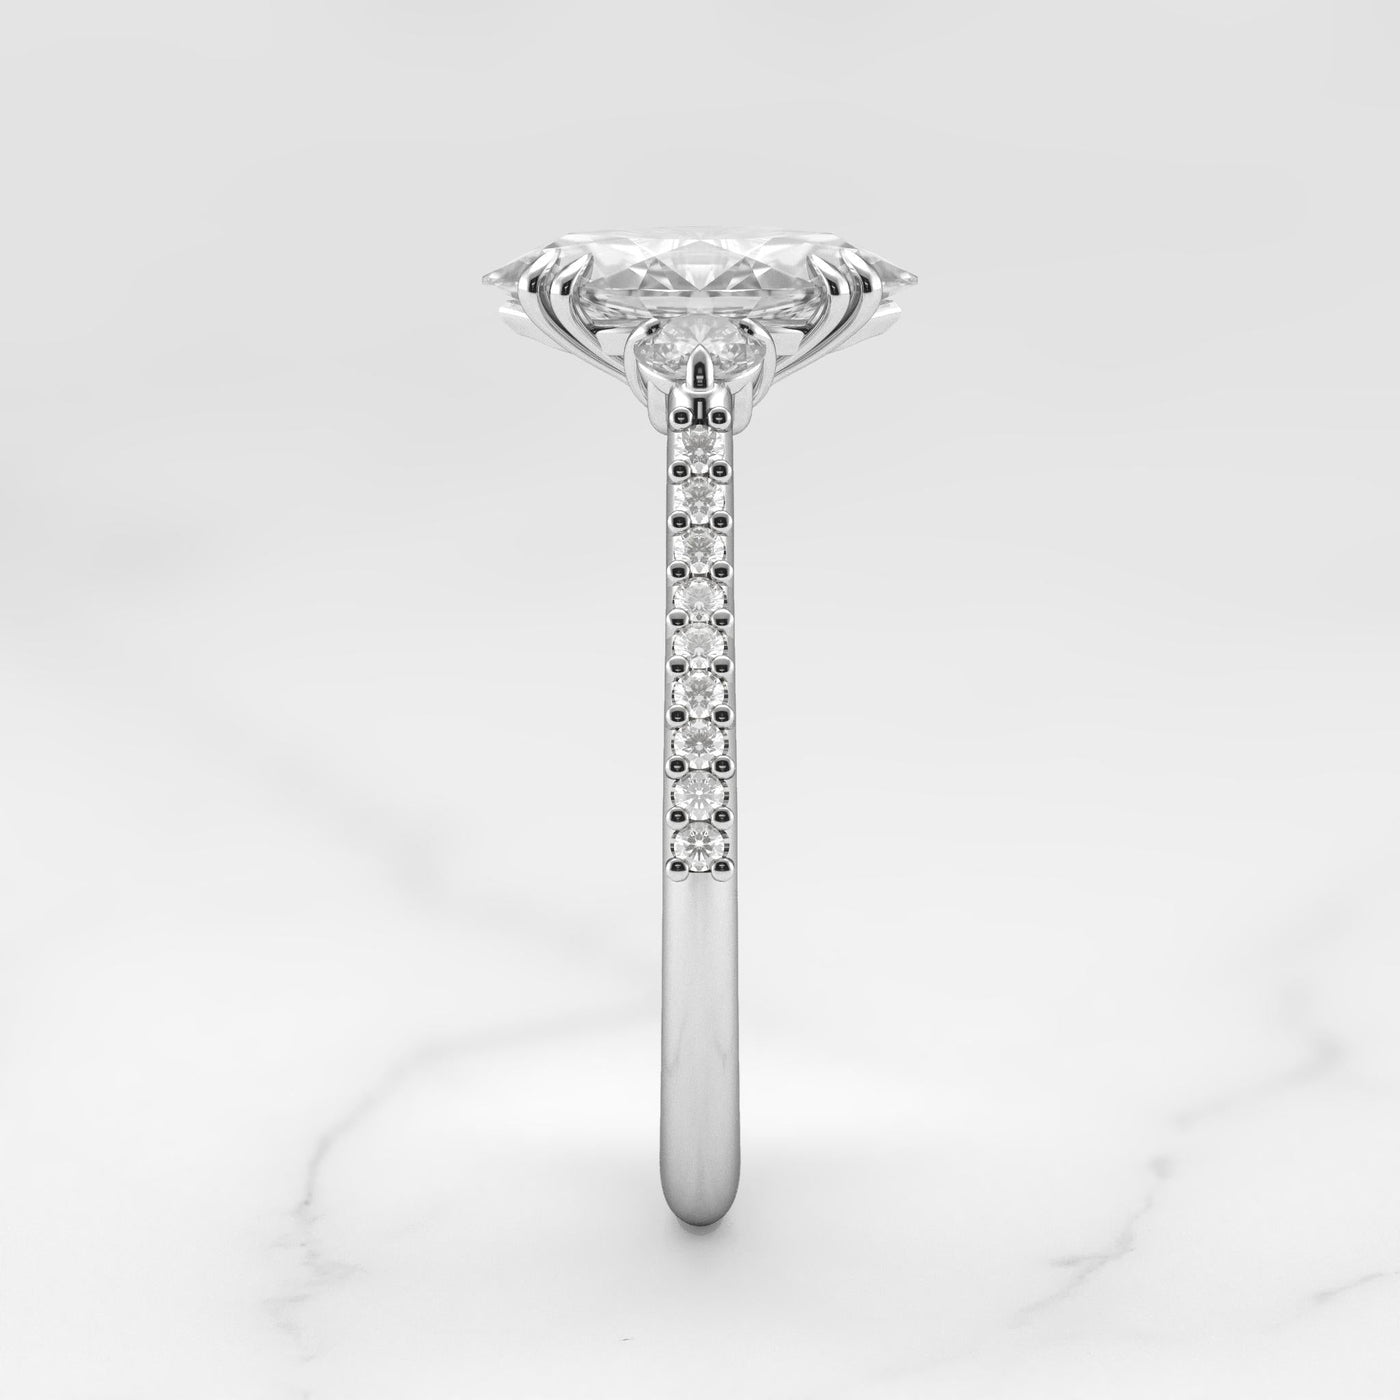 Marquise-cut half pave diamond ring with accent stones